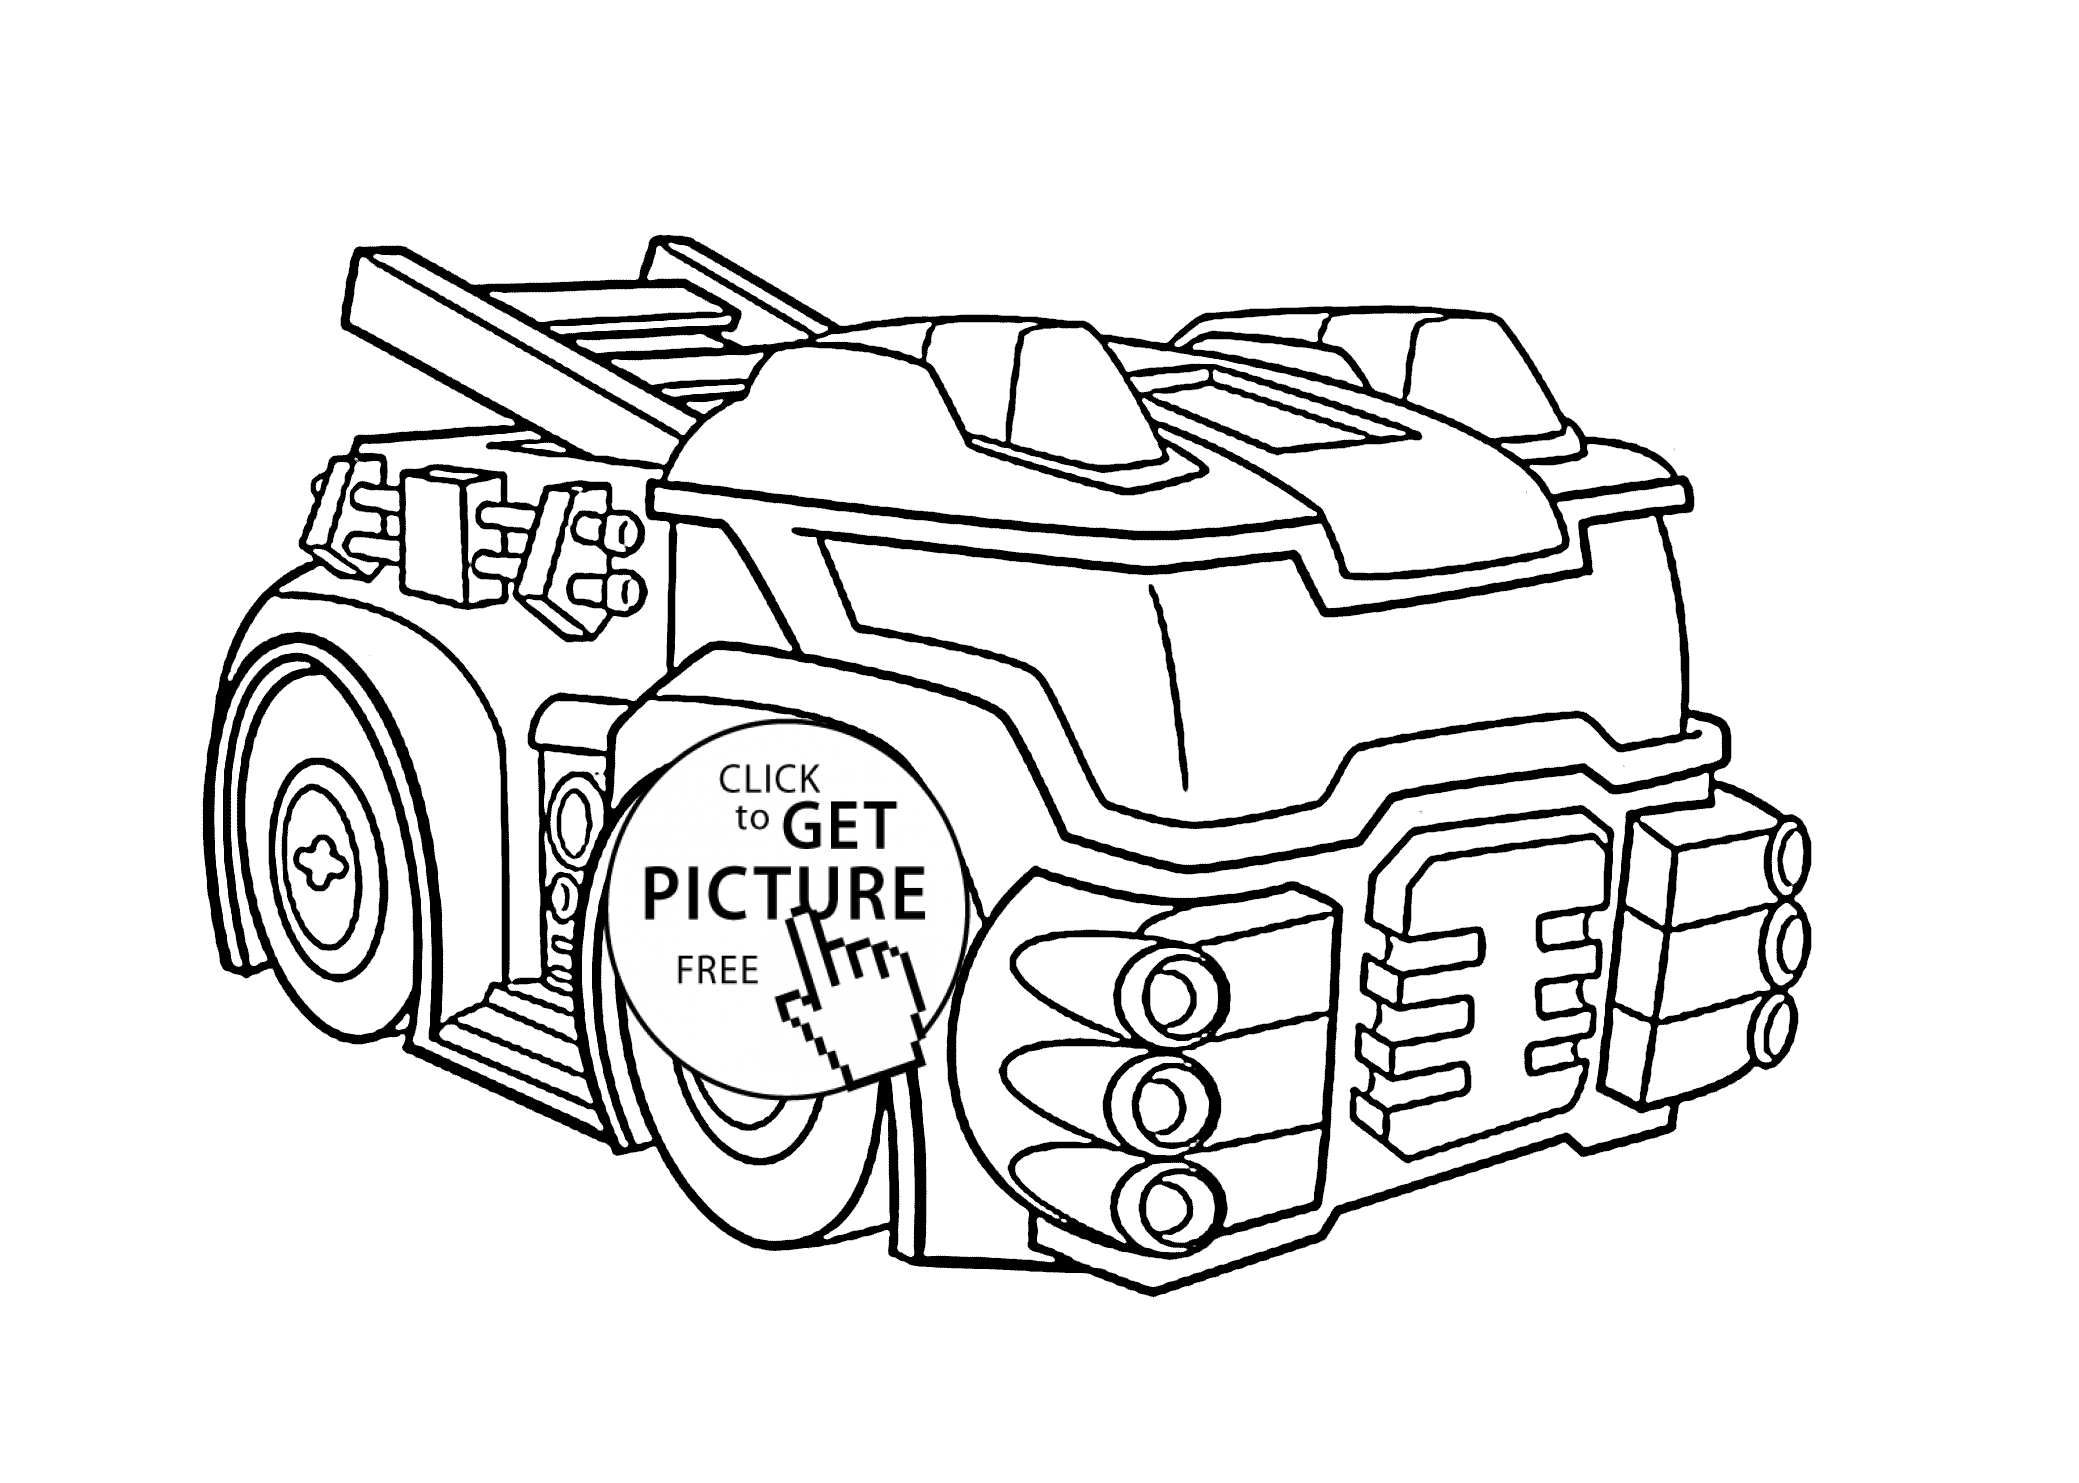 Heatwave the fire bot coloring pages for kids, printable free - Rescue bots